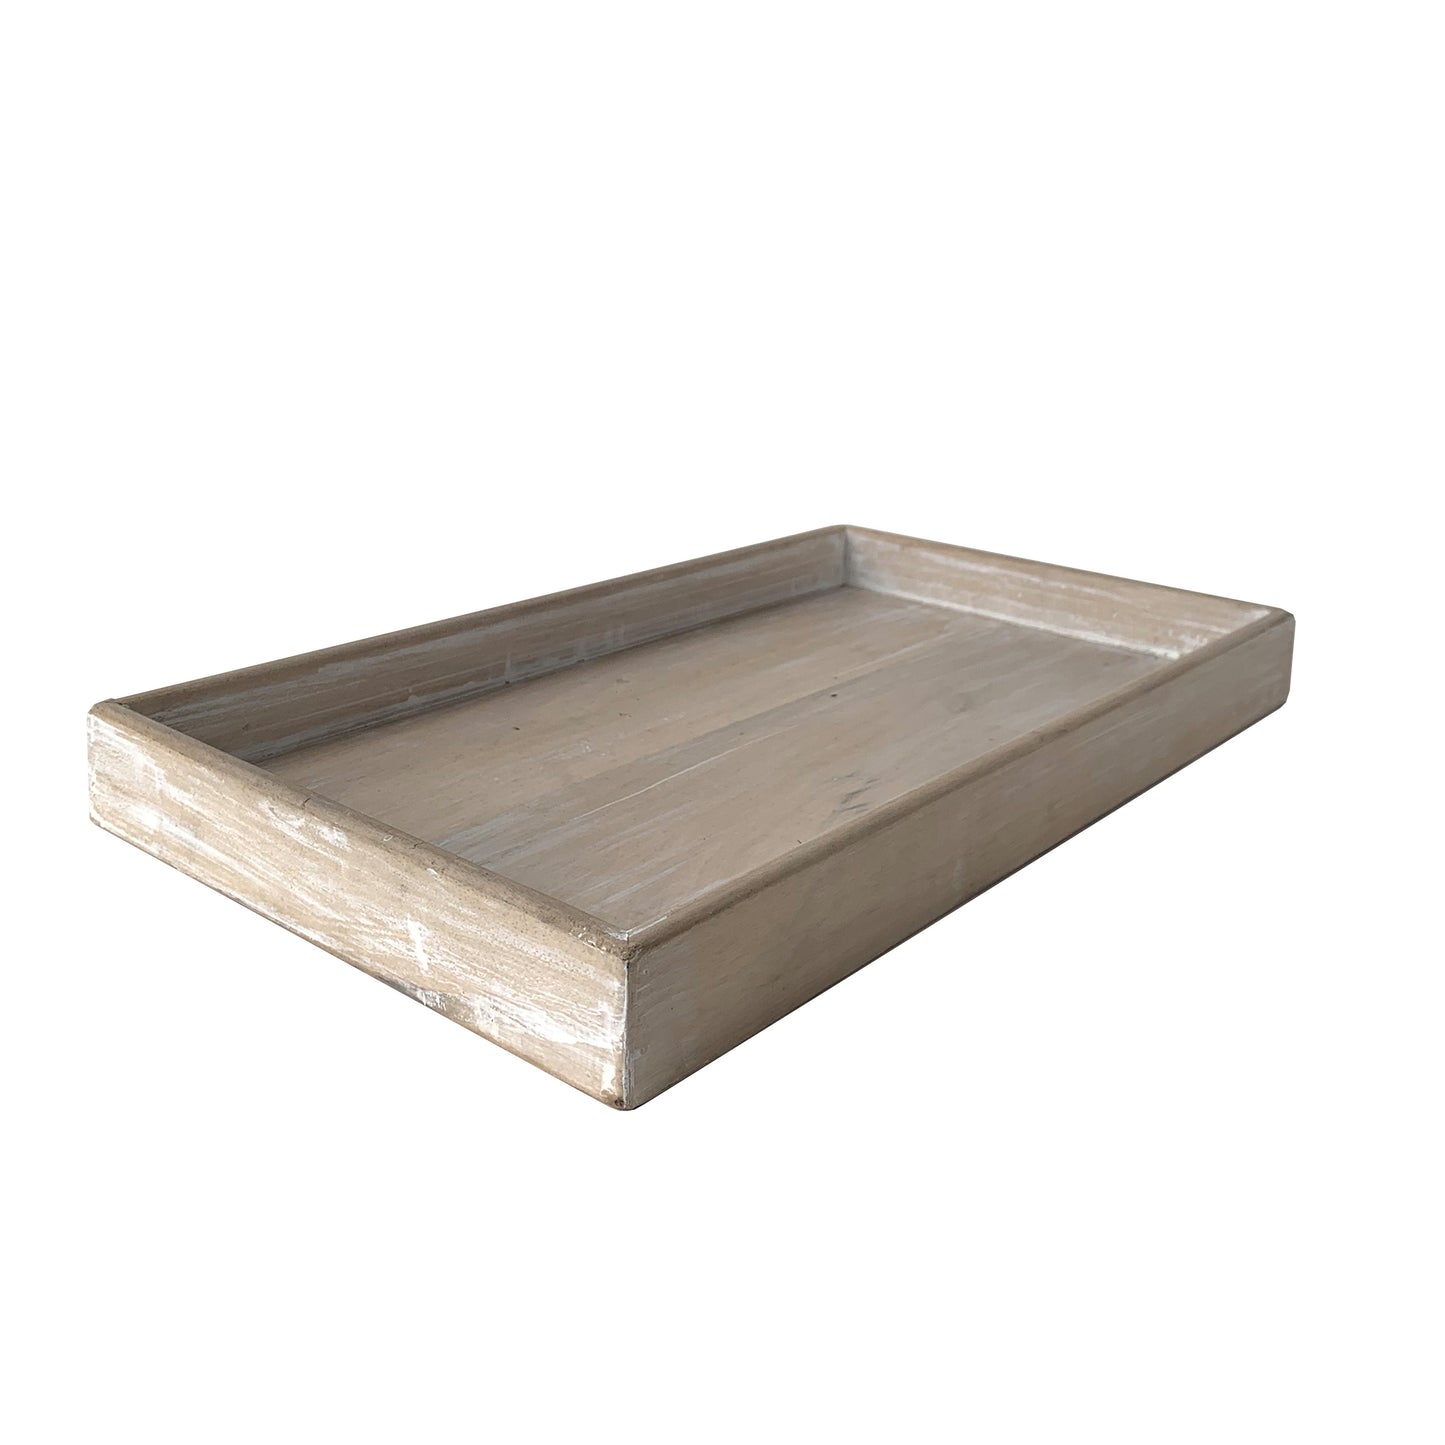 Wooden Tray White Washed